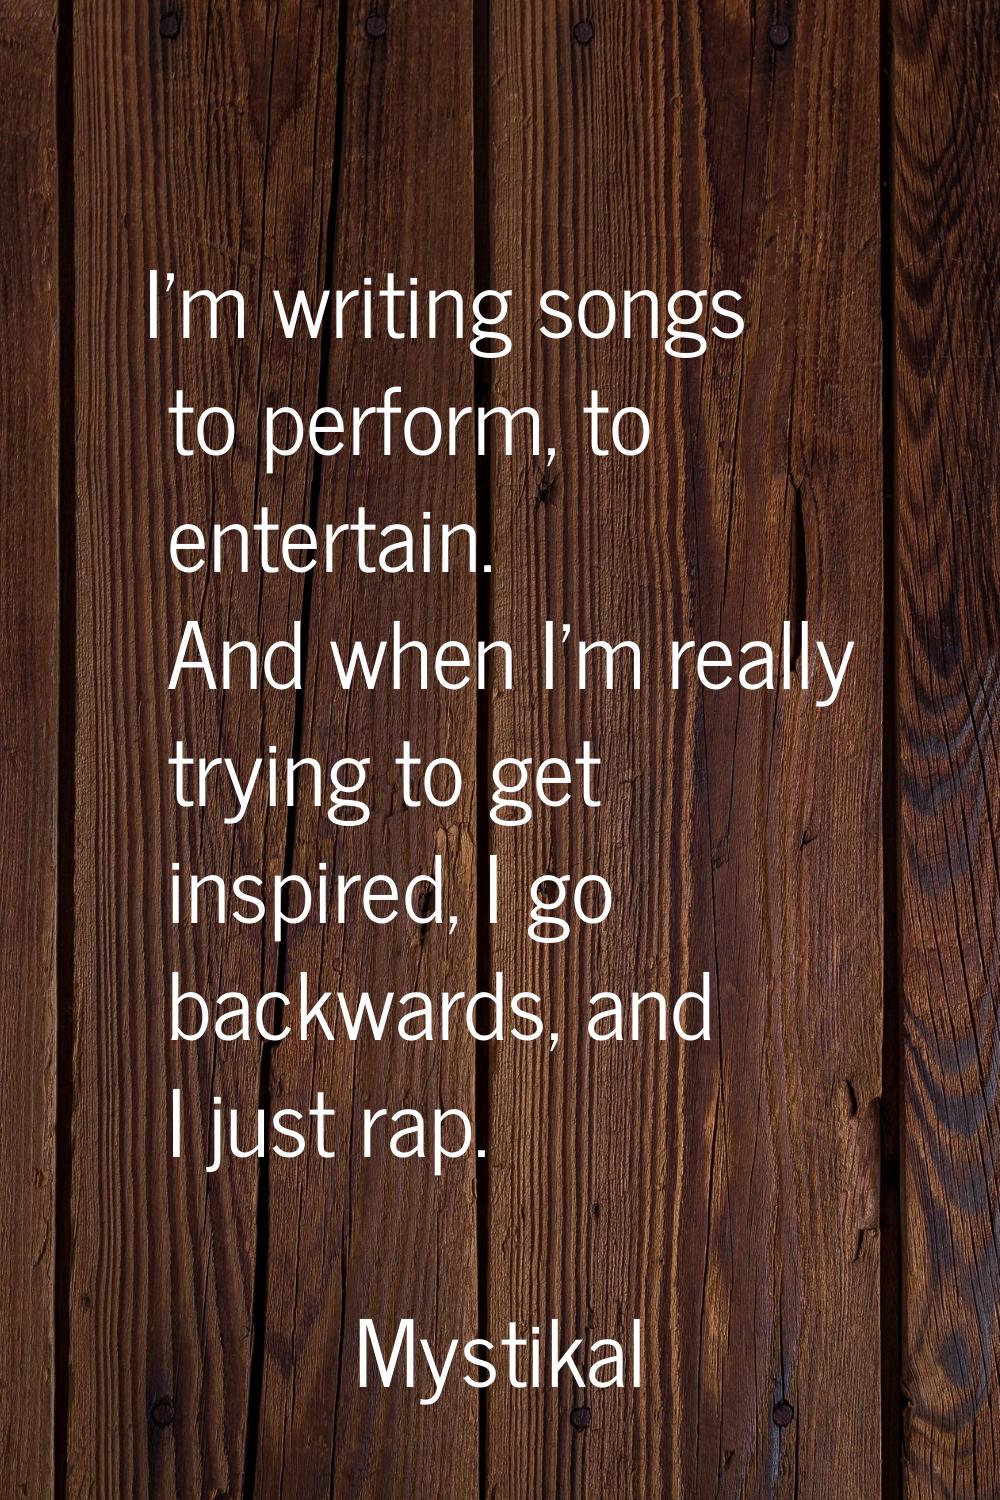 I'm writing songs to perform, to entertain. And when I'm really trying to get inspired, I go backwa